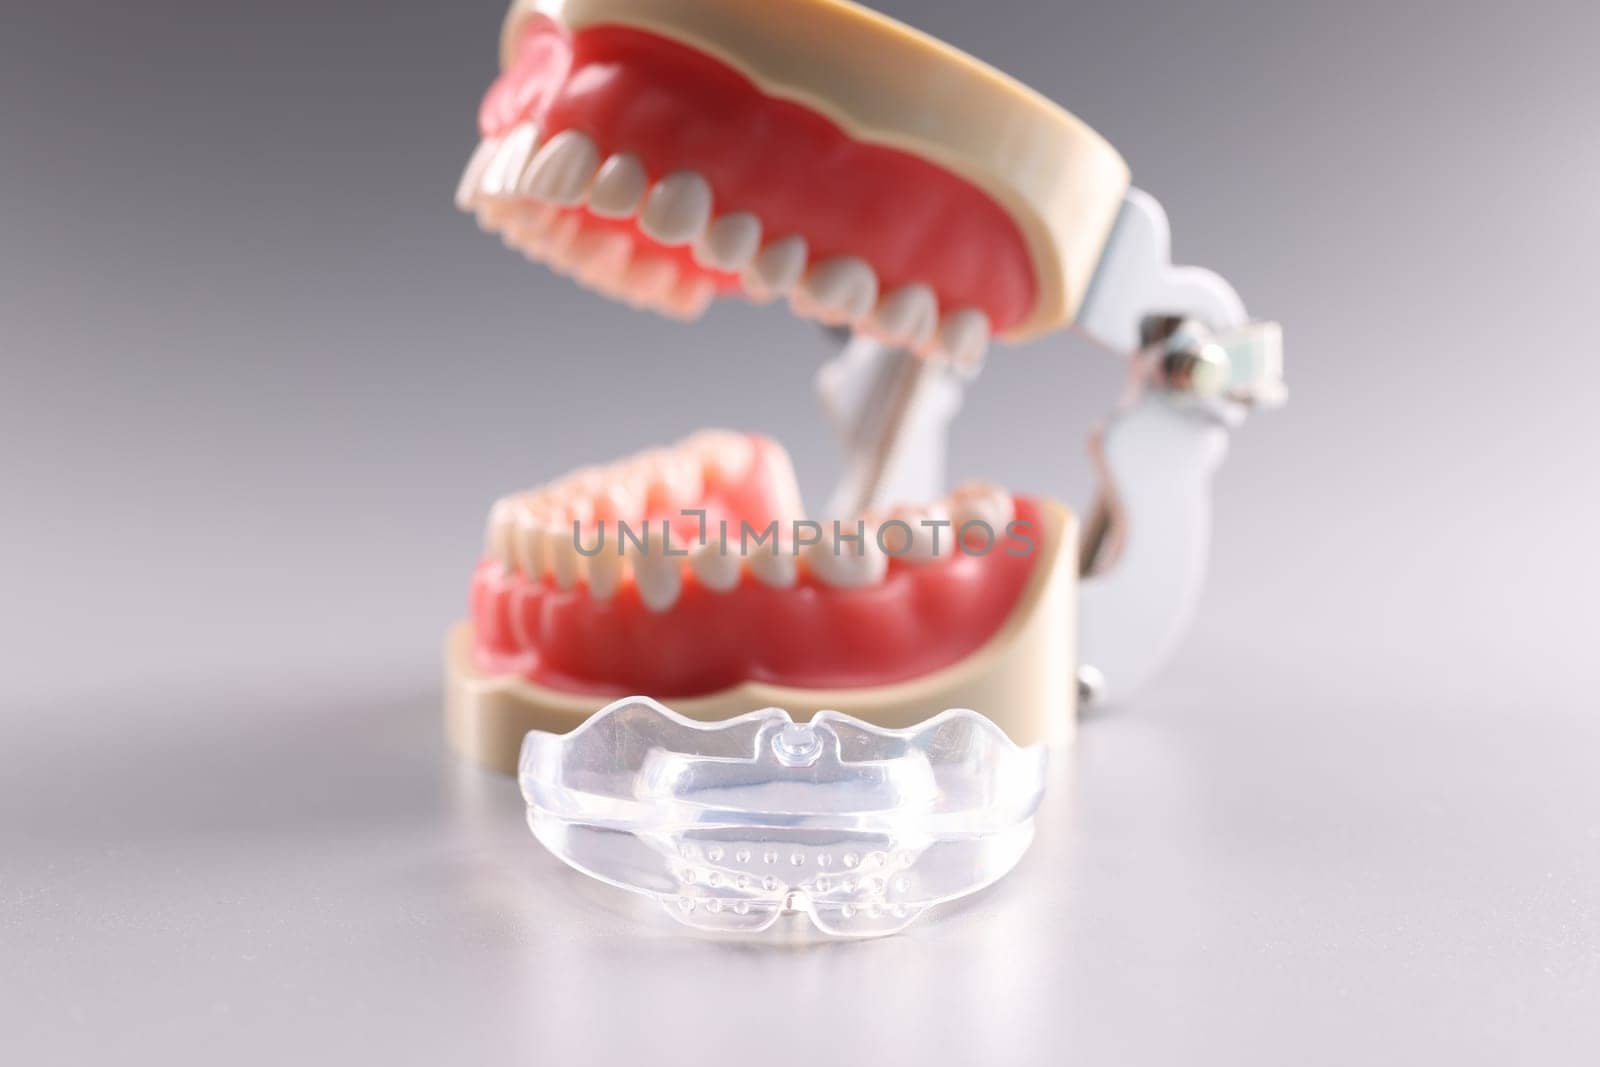 Silicone orthodontic retainers to hold teeth and artificial jaw. Orthodontics dental care for teeth alignment